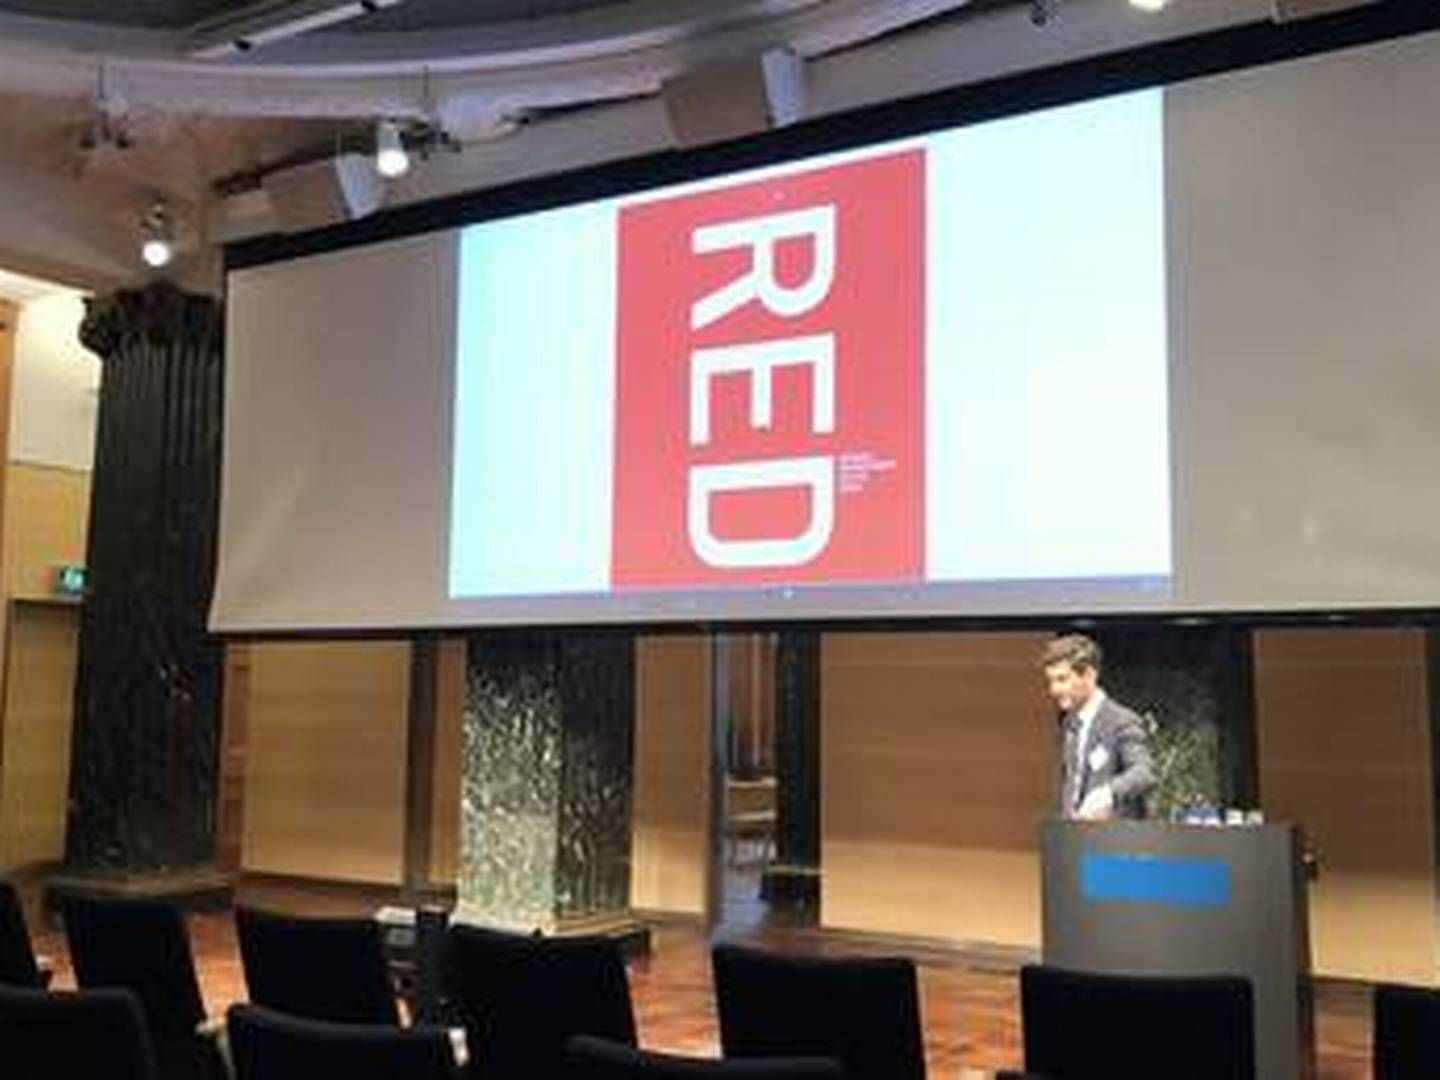 Nicholas Thurø, leading partner at Cushman & Wakefield Red, gave a presentation about the firm's 2020 expectations on Tuesday. | Photo: Sacha Sennov